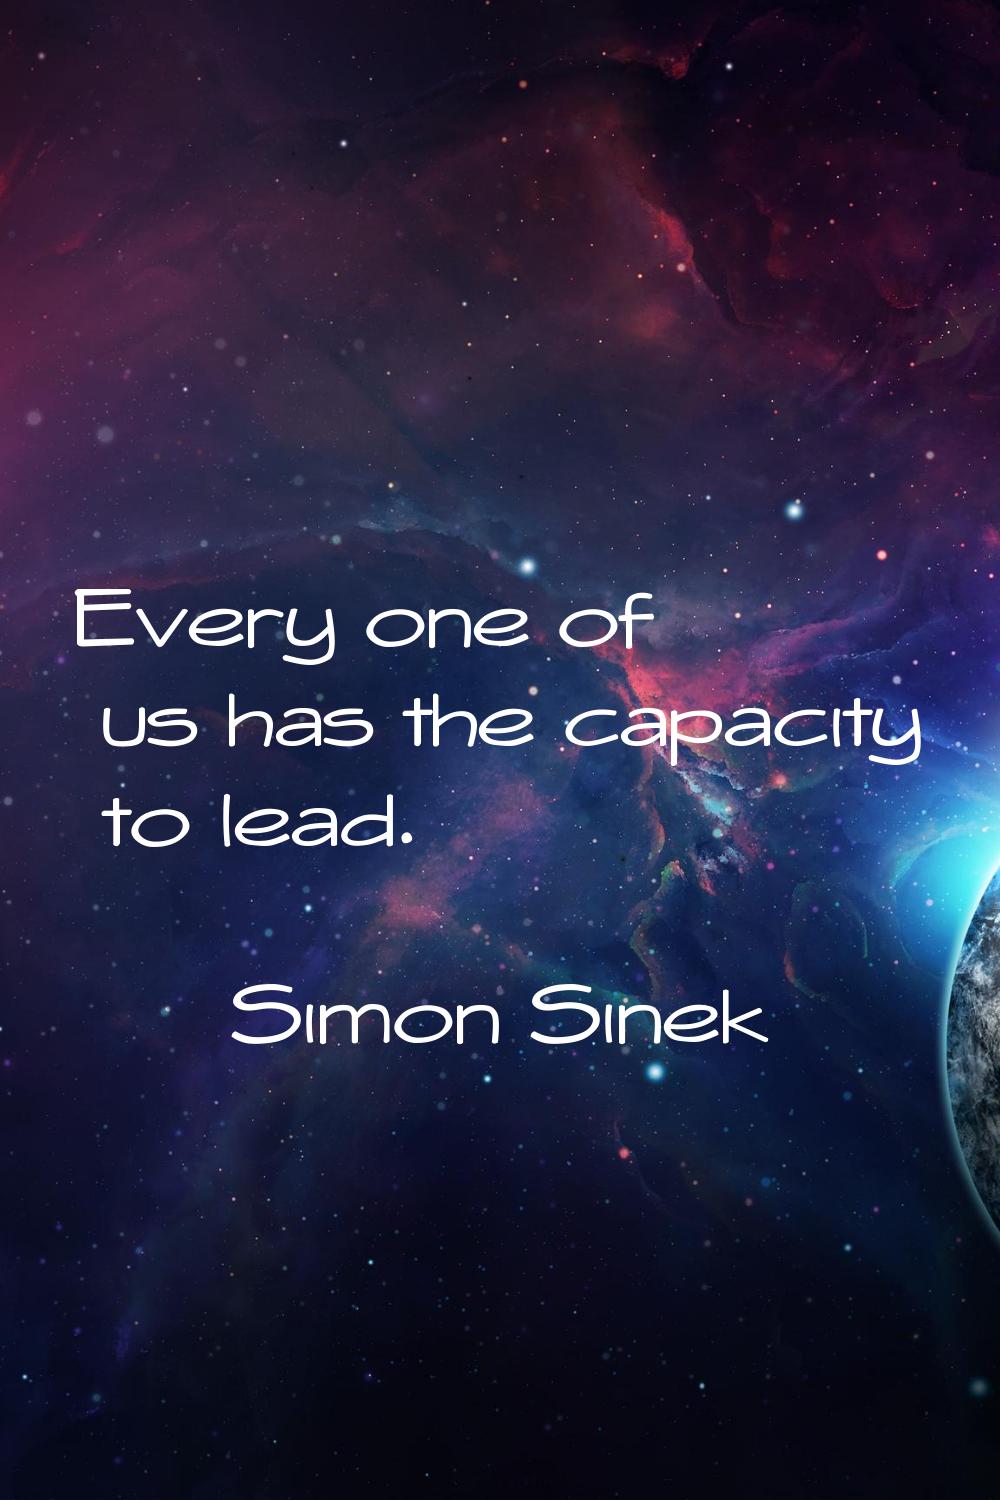 Every one of us has the capacity to lead.